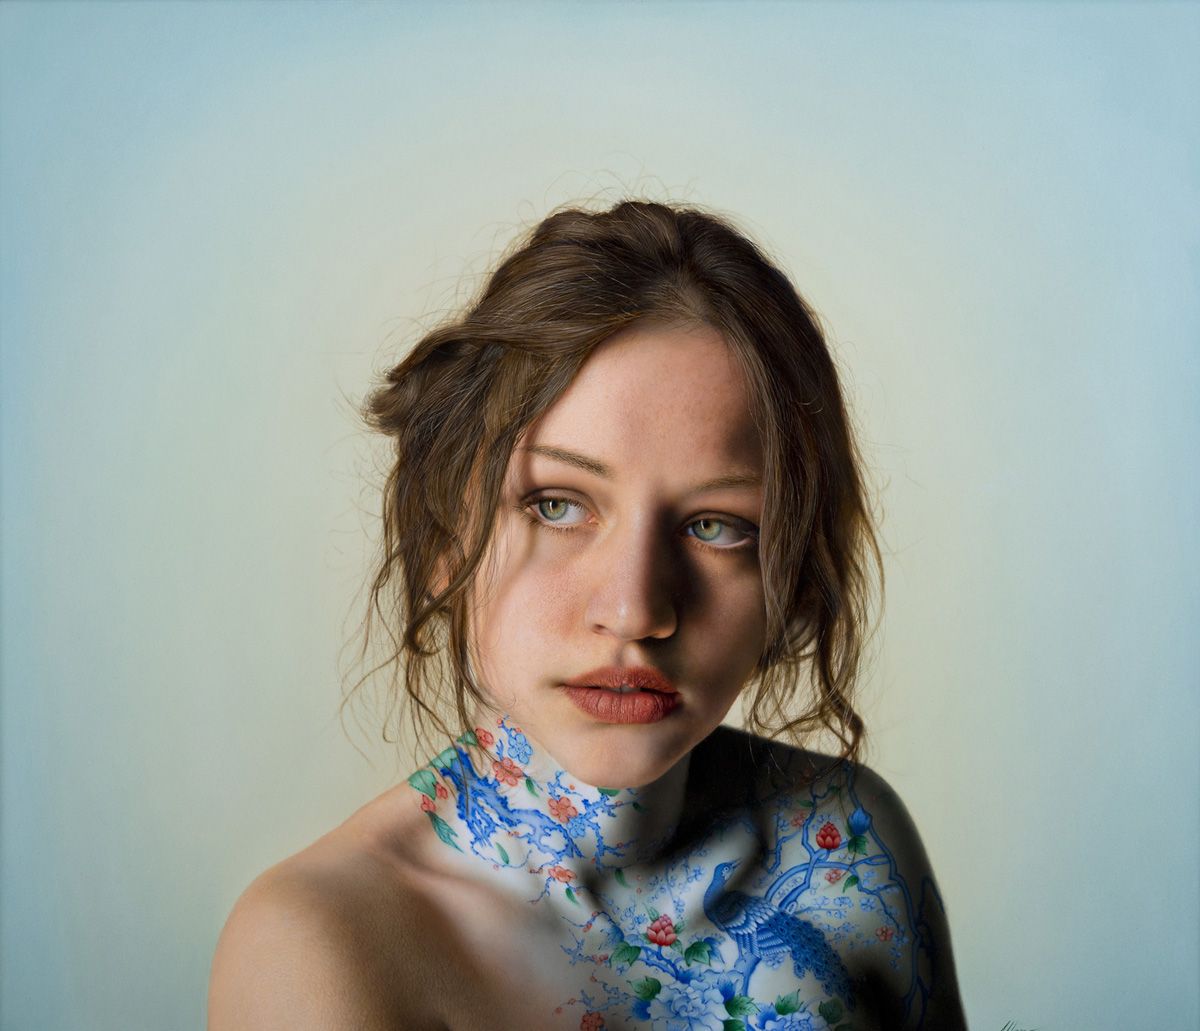 Stunning Hyper Realistic Portrait Paintings With A Twist To